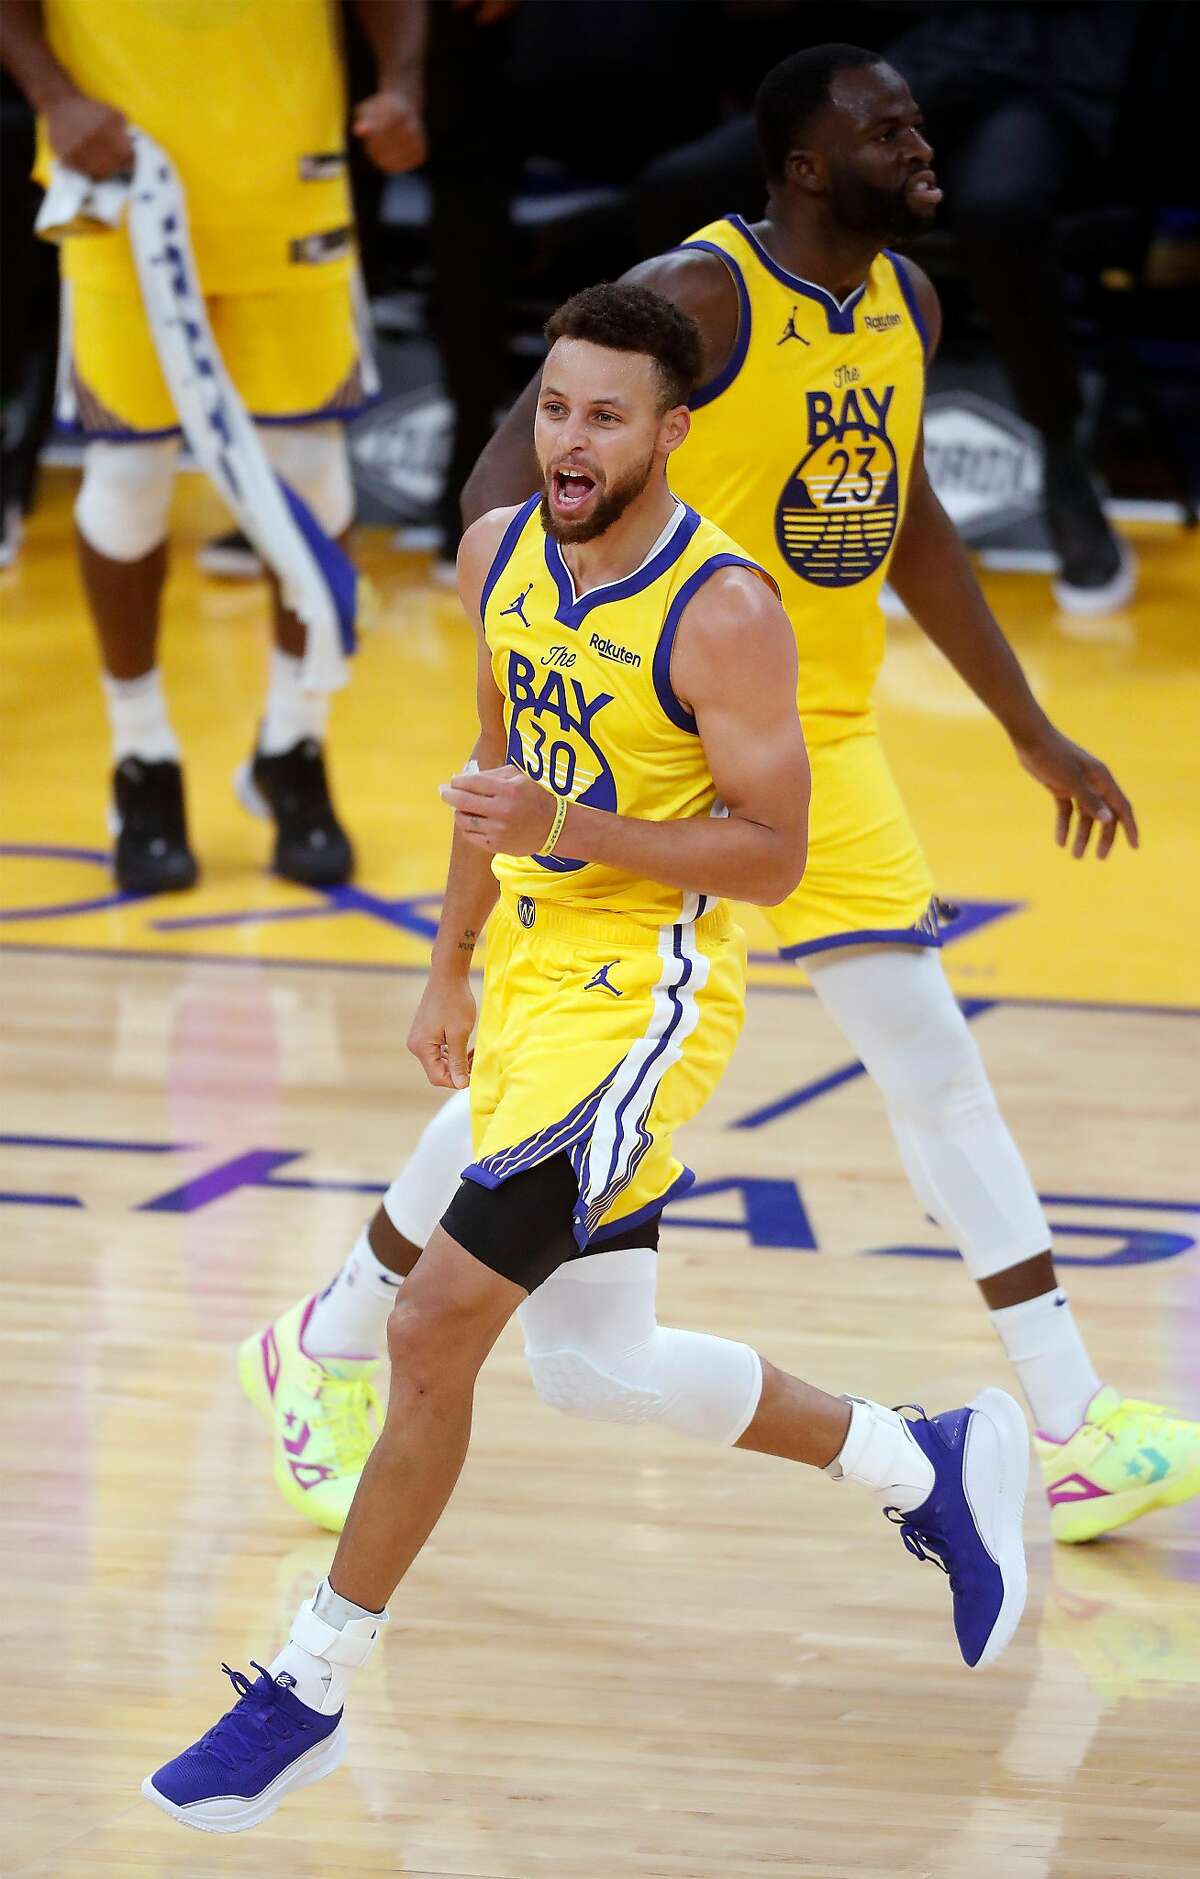 Golden State Warriors' Stephen Curry celebrates his 3-pointer giving him a career high 62 points in 4th quarter of Warriors' 137-122 win over Portland Trail Blazers in NBA game at Chase Center in San Francisco, Calif., on Sunday, January 3, 2021.